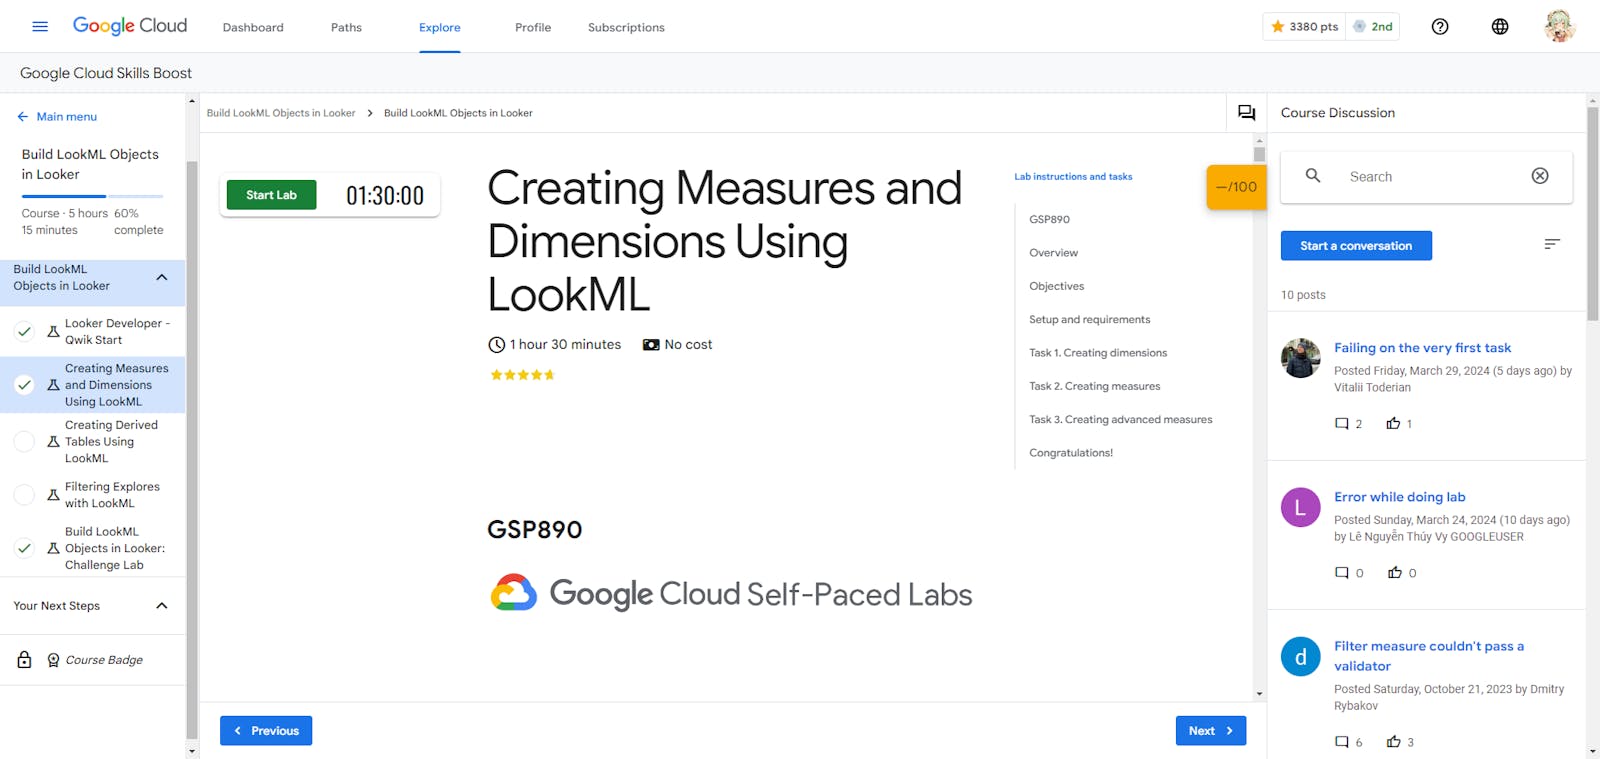 Creating Measures and Dimensions Using LookML - GSP890